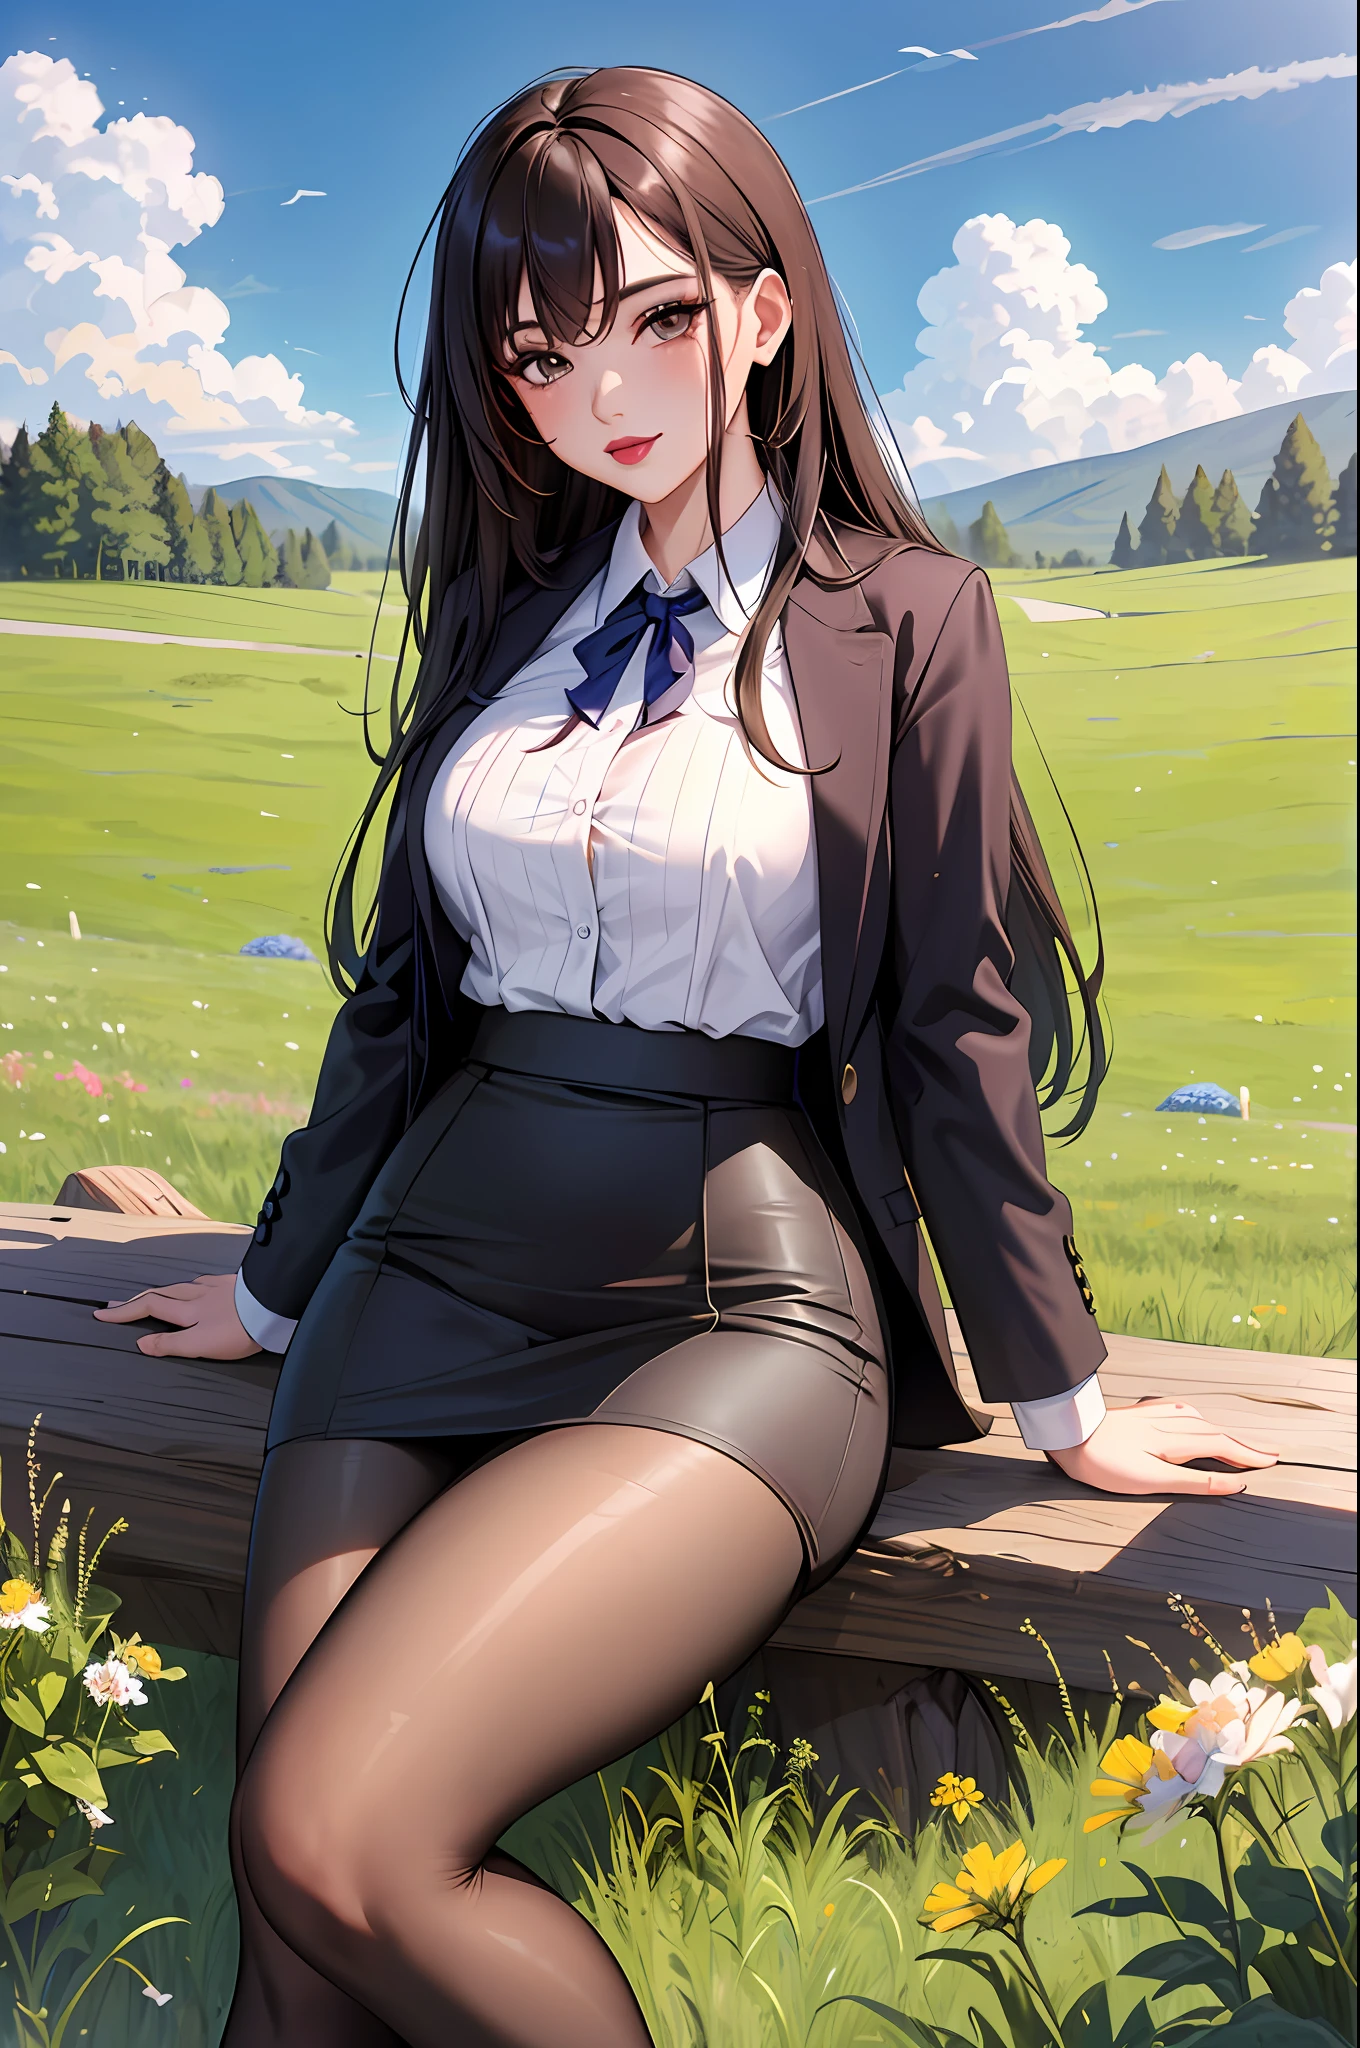 4K, Meadow, pasture, dirt road, clear sky with some clouds, bushes,depravity,thick thighs, woman, teacher, pencil skirt, lipstick,makeup, pantyhose,